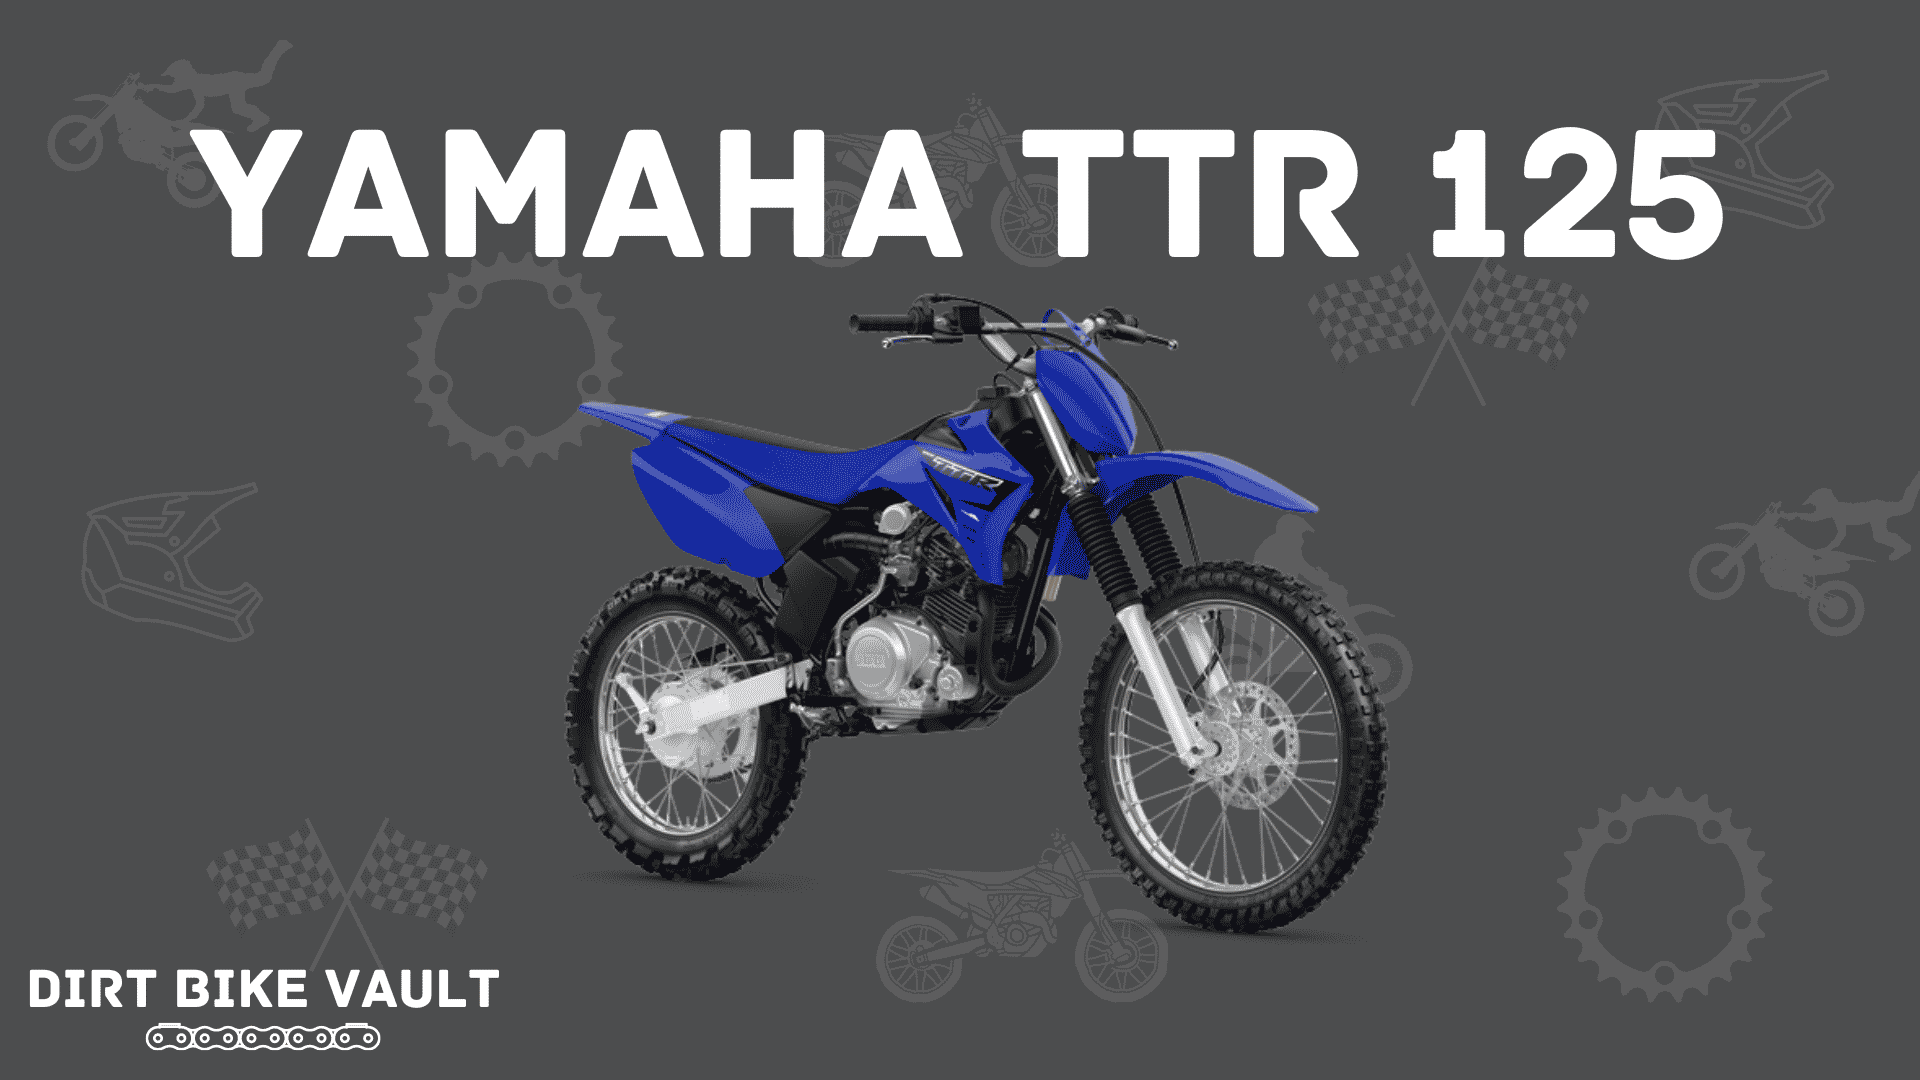 Yamaha TTR 125 in white text on gray background with image of Yamaha TTR 125 dirt bike